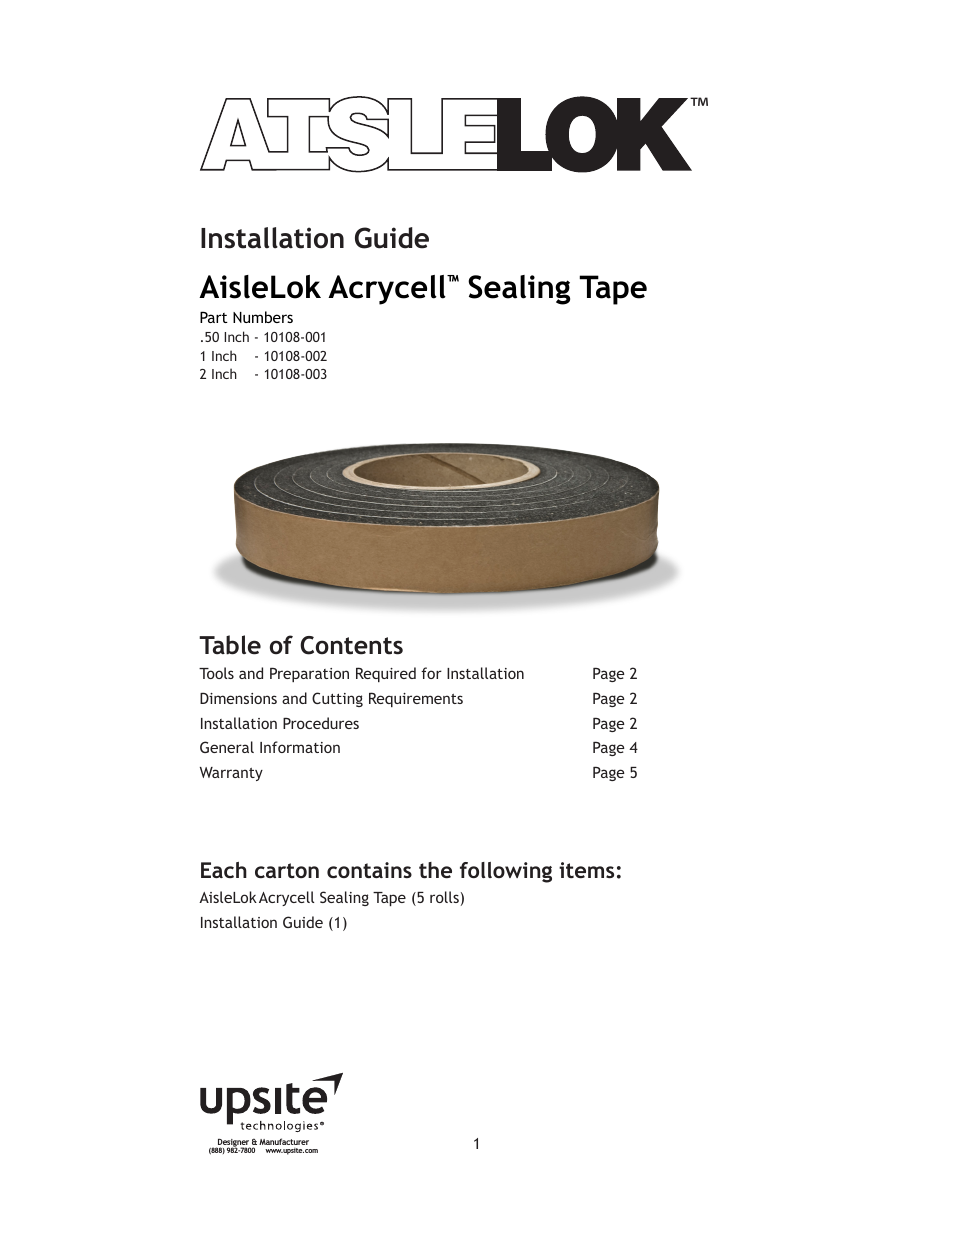 10108-002 Acrycell Sealing Tape